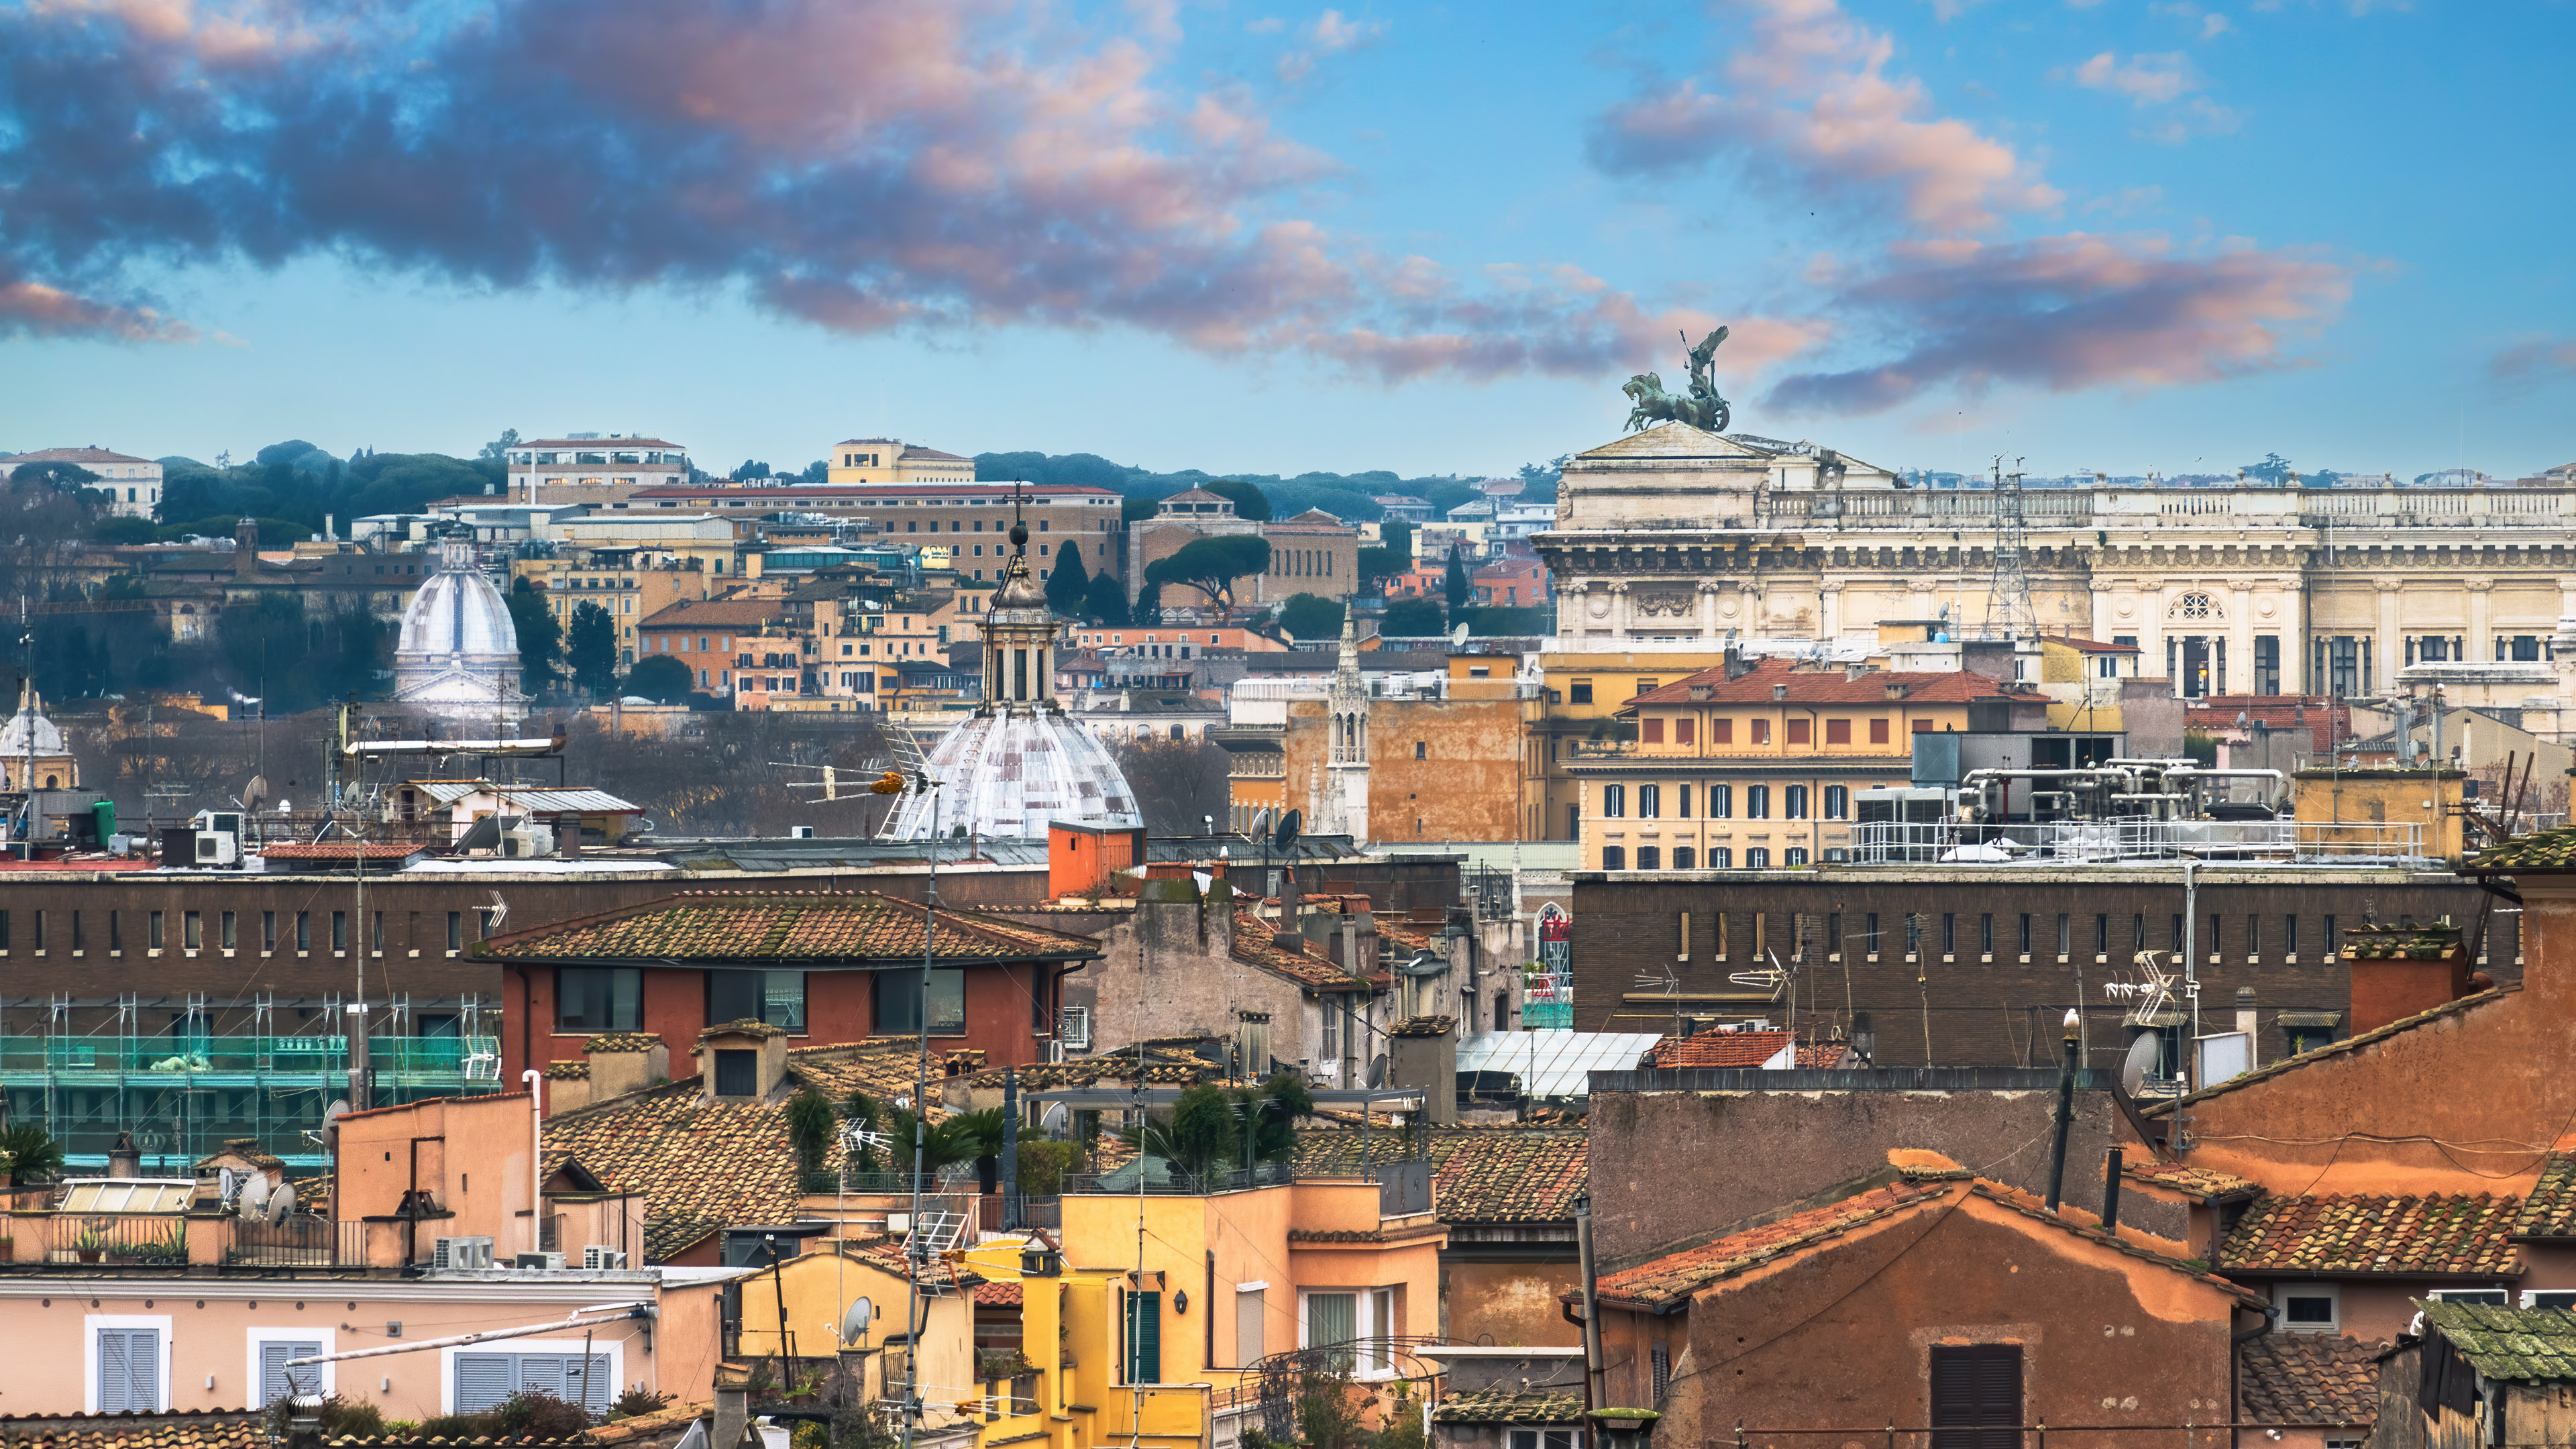 An artistic cityscape wallpaper of Rome featuring the city's most iconic landmarks.